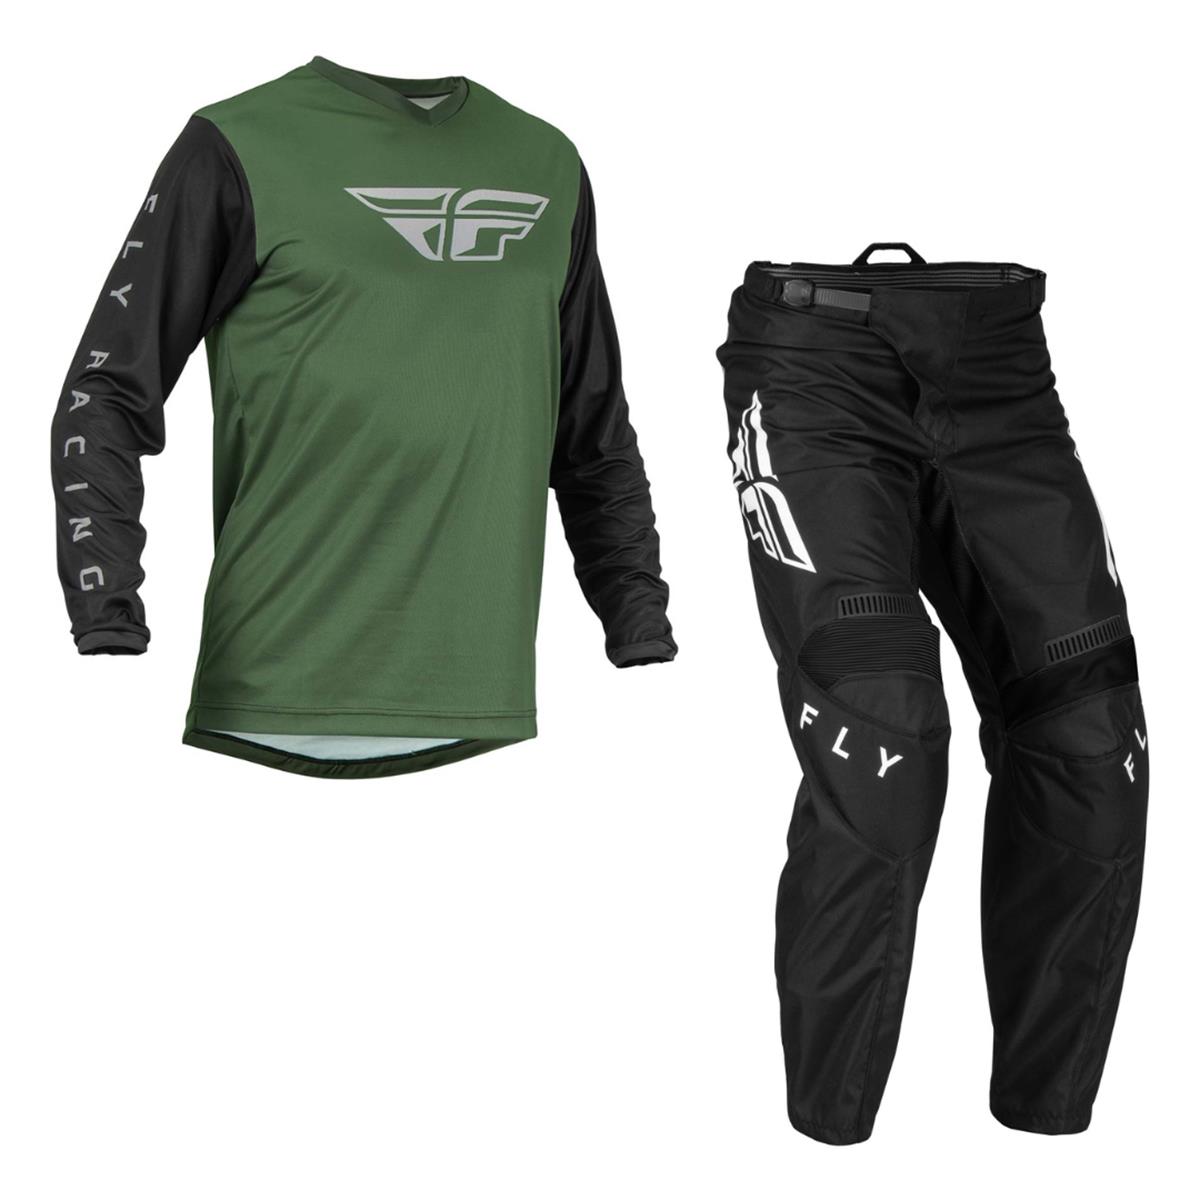 Fly Racing MX Gear Kit F-16 Set: 2 pieces, Olive/Black/White